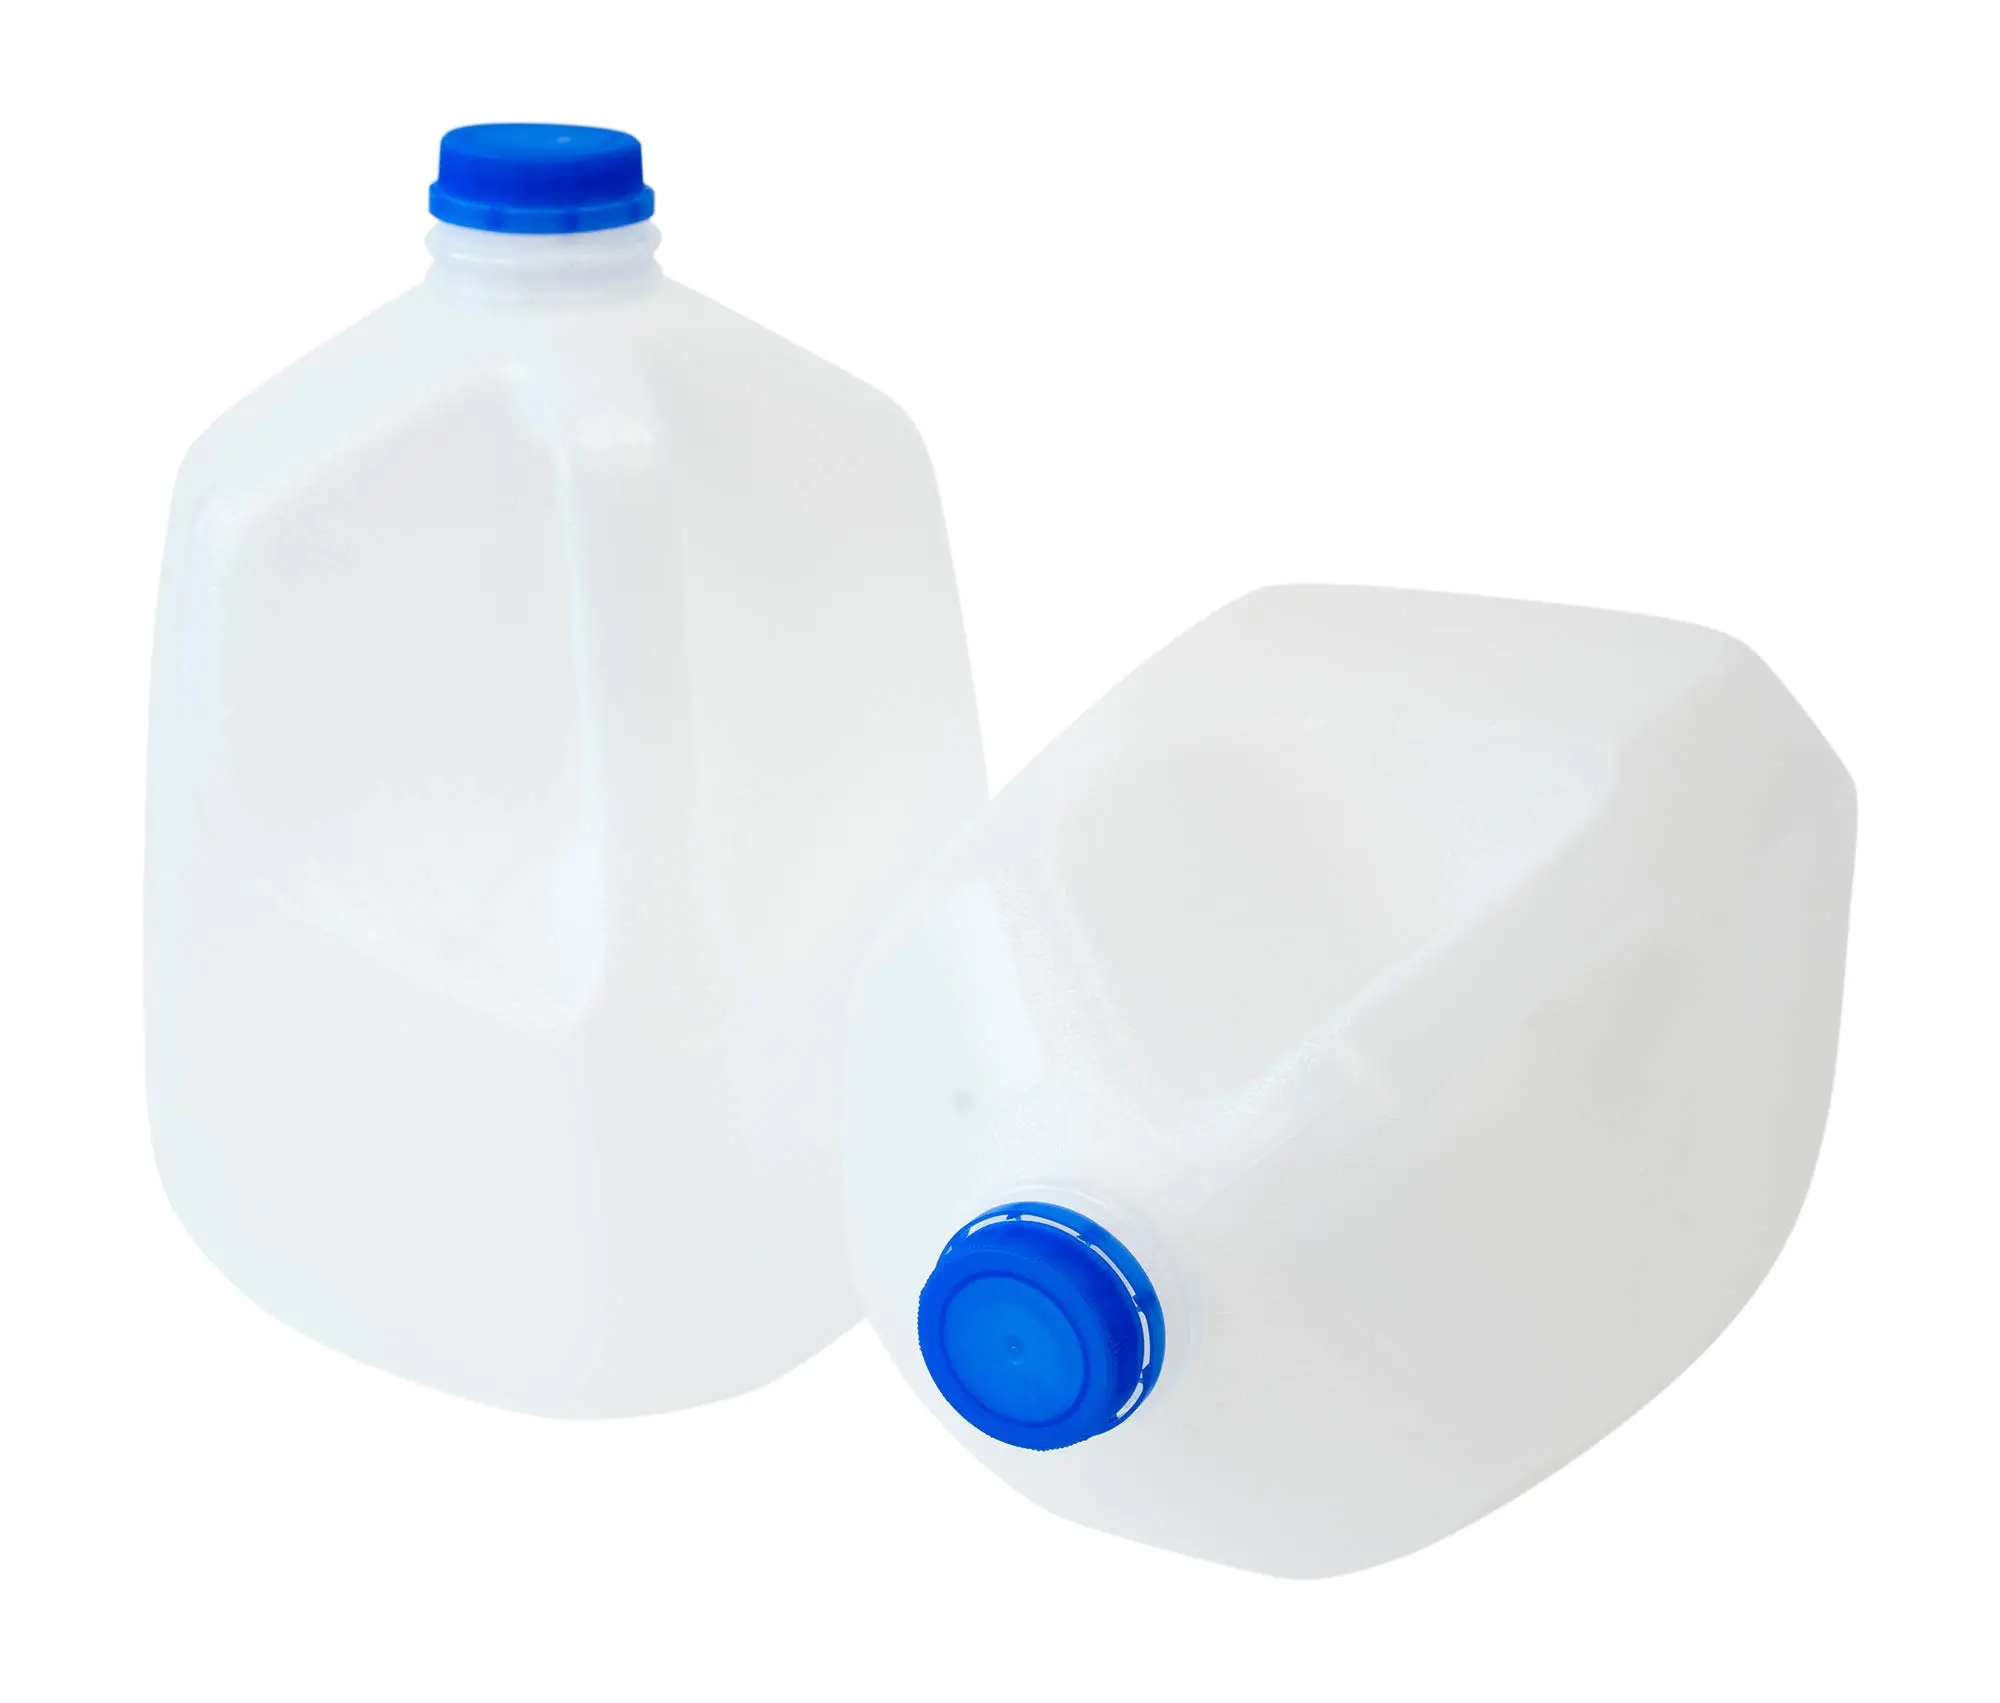 empty milk jugs - What can I make with empty milk jugs